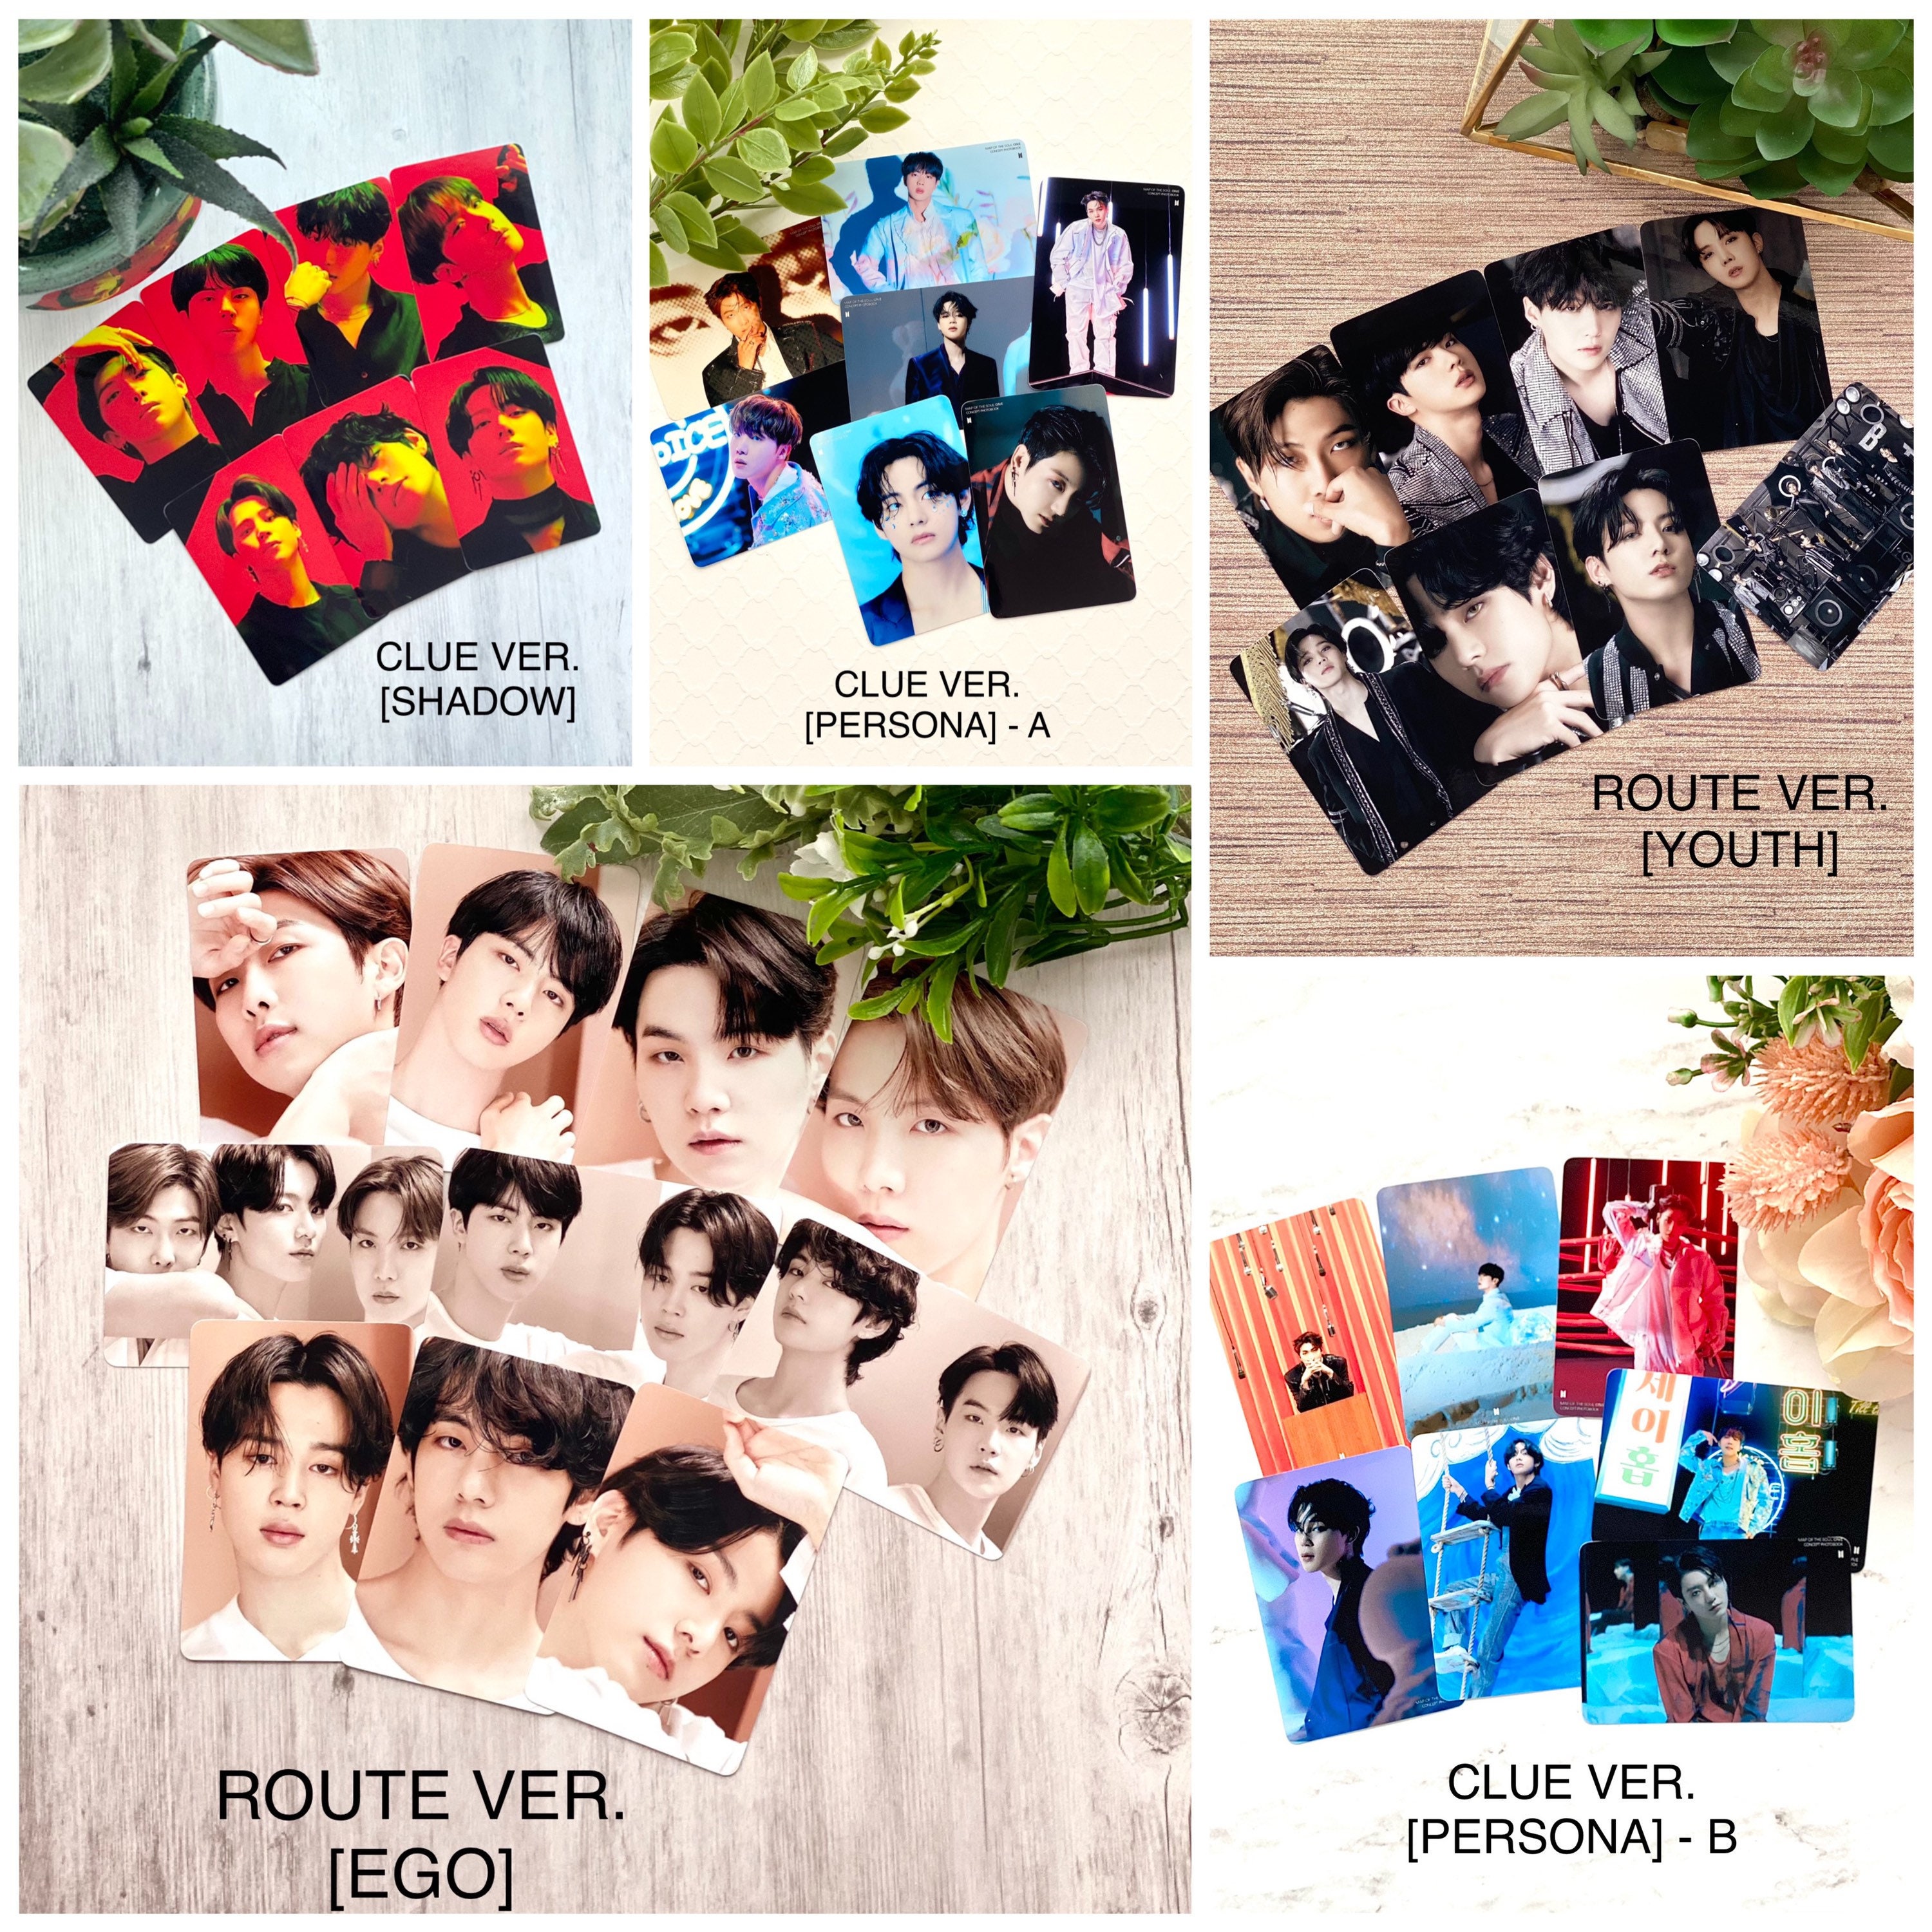 BTS Map of The Soul ONE Concept Photobook Route Version